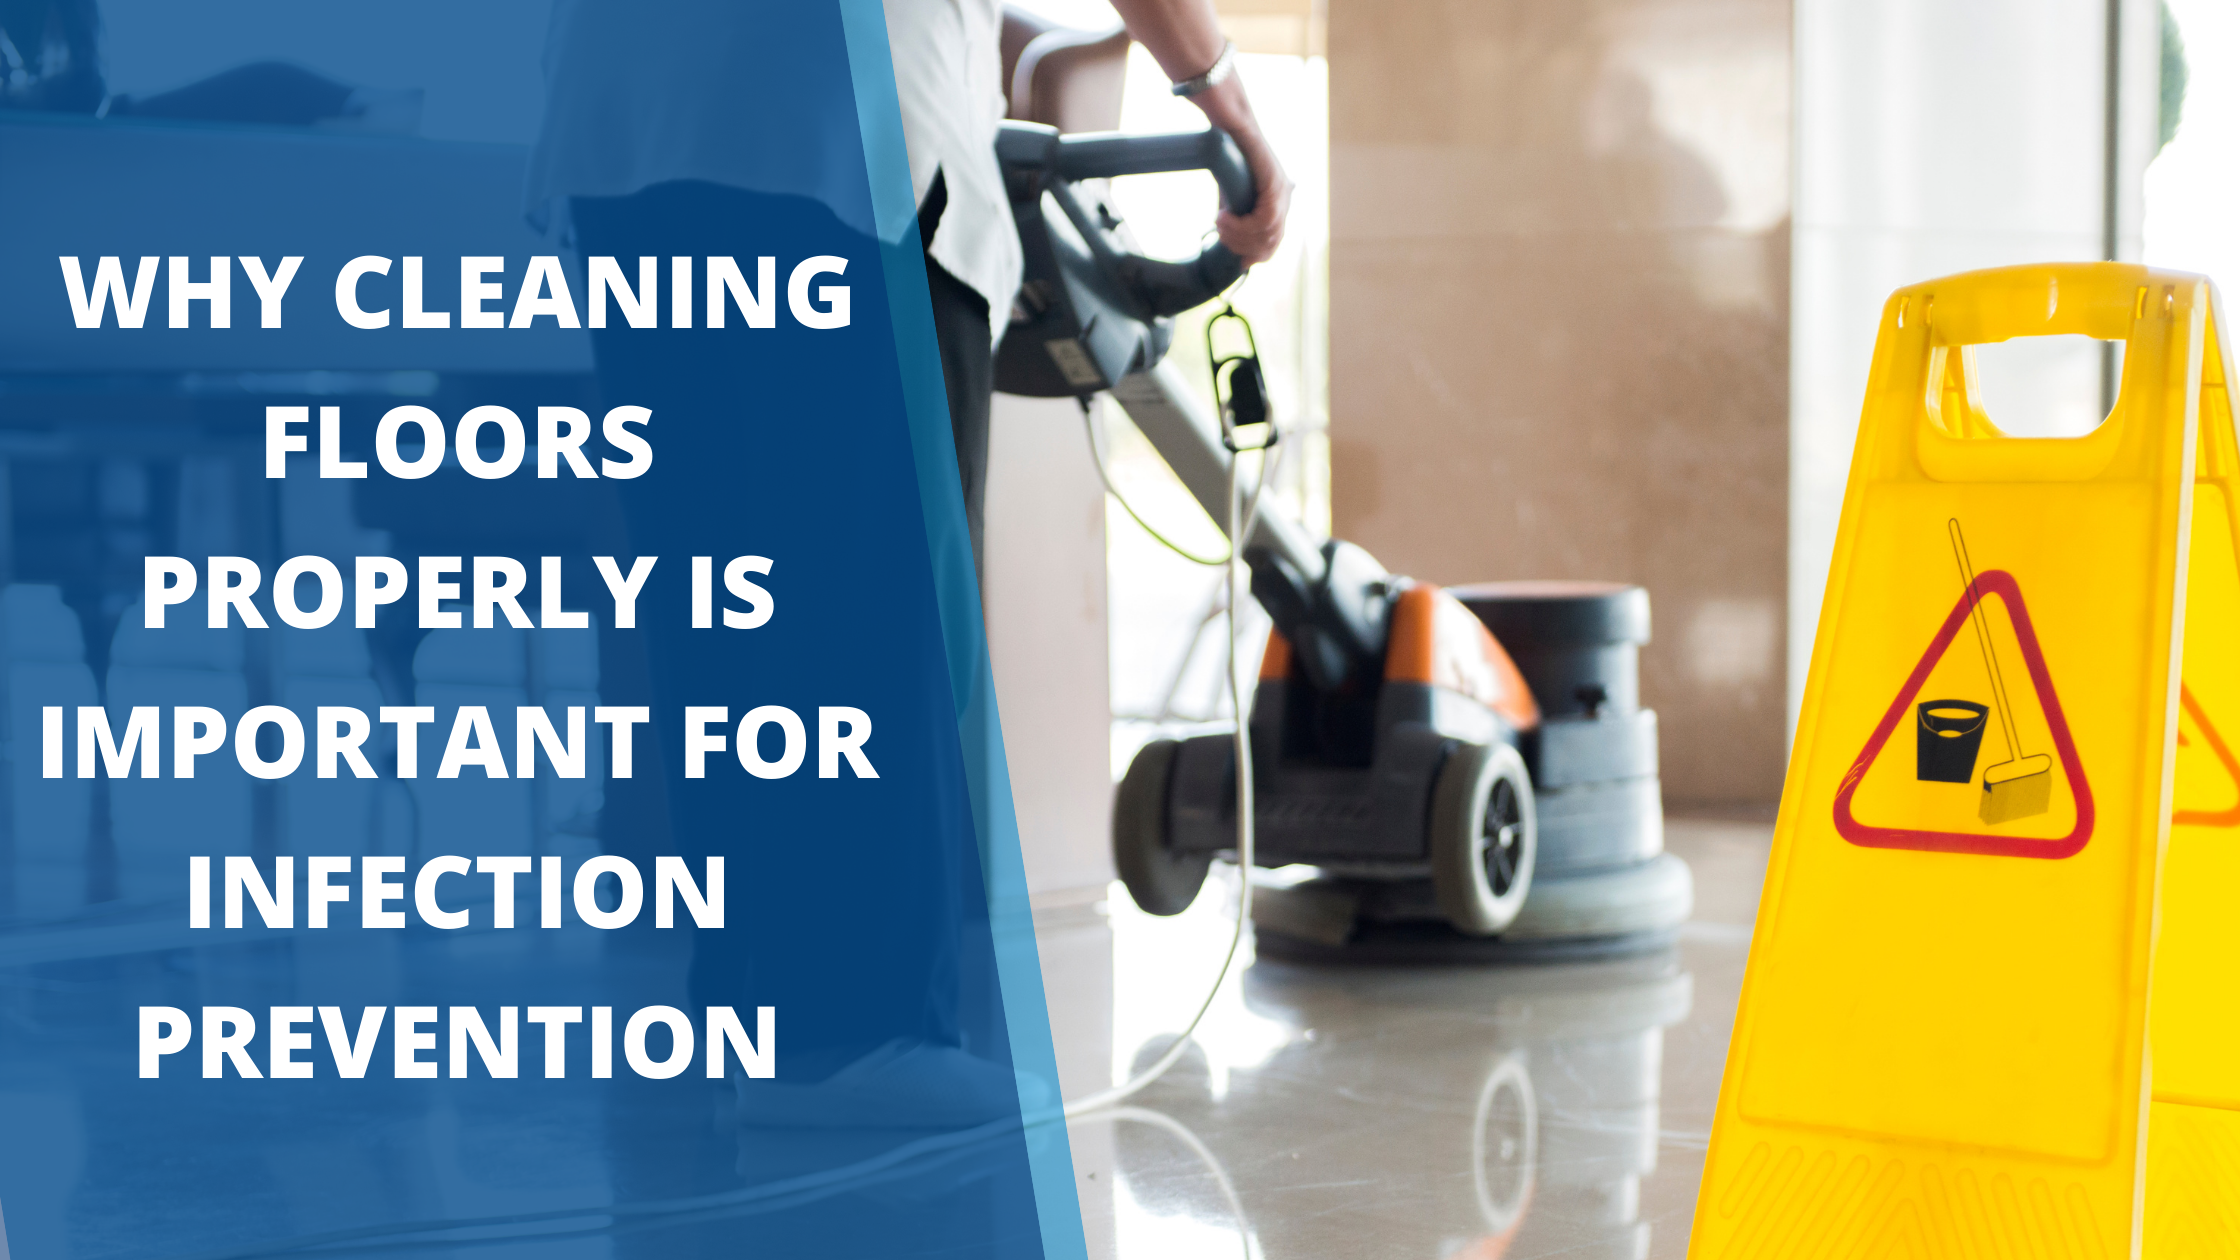 Why Routine Commercial Floor Cleaning Properly Is Important for Infection Prevention